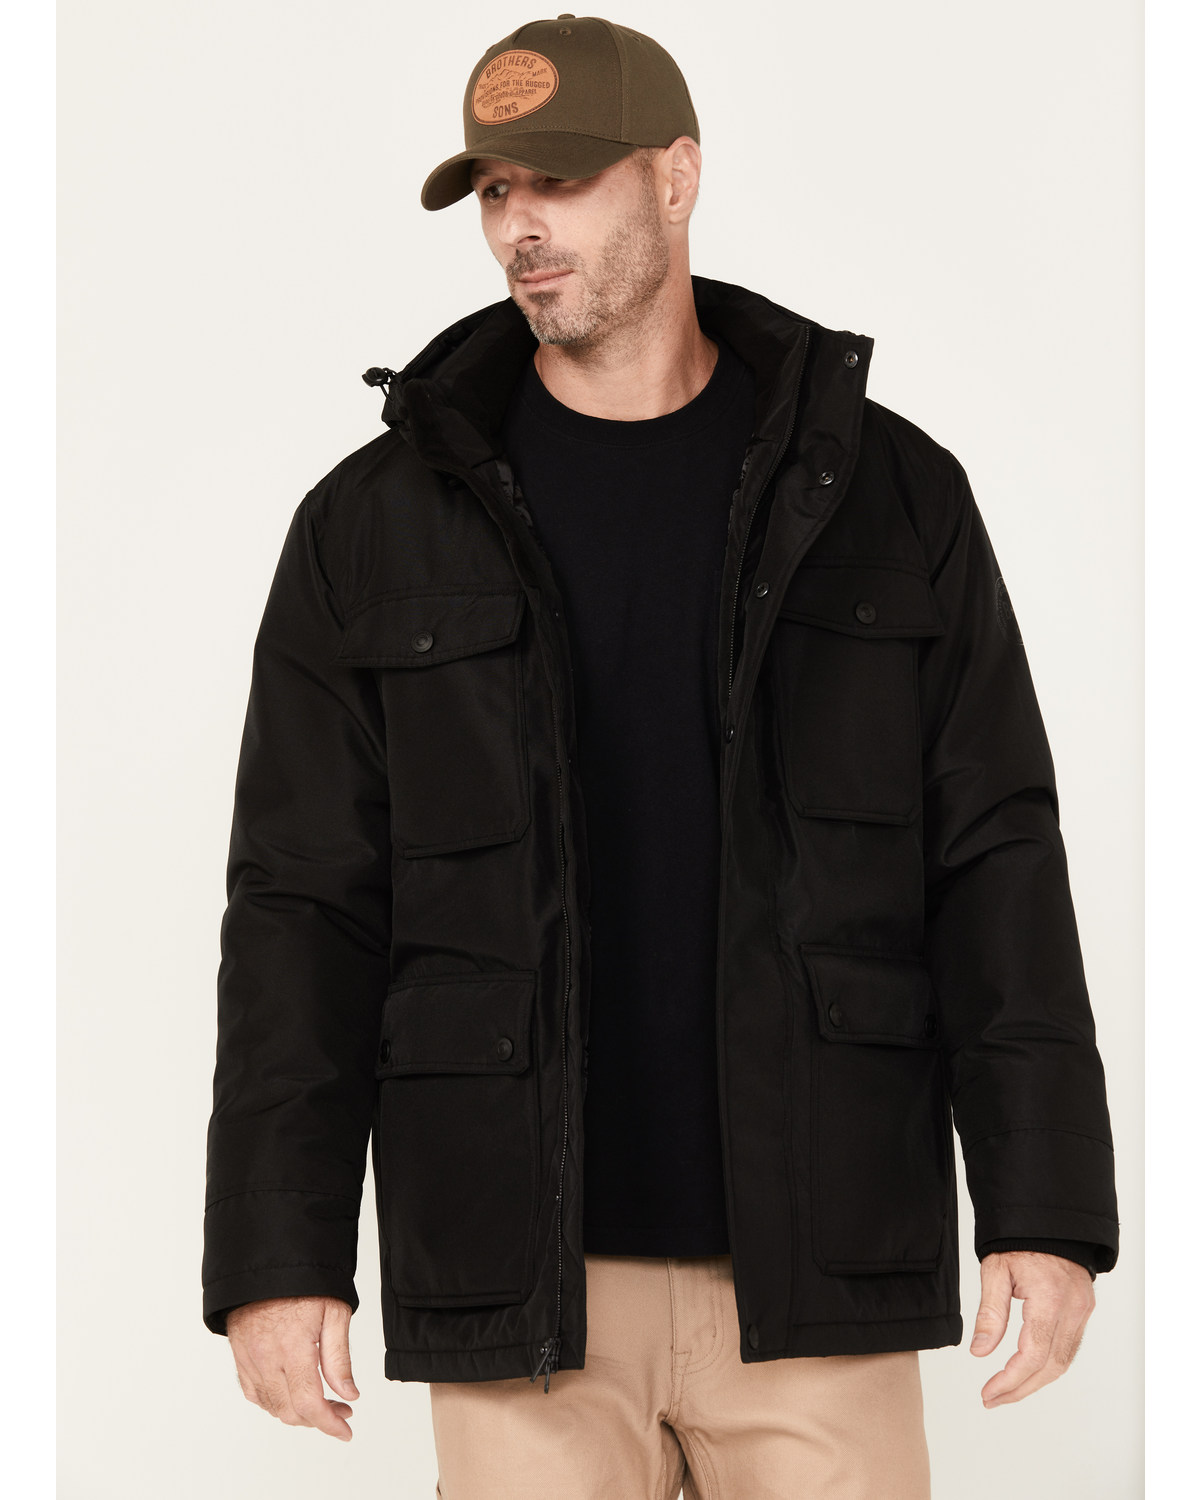 Brothers and Sons Men's Insulated Parka